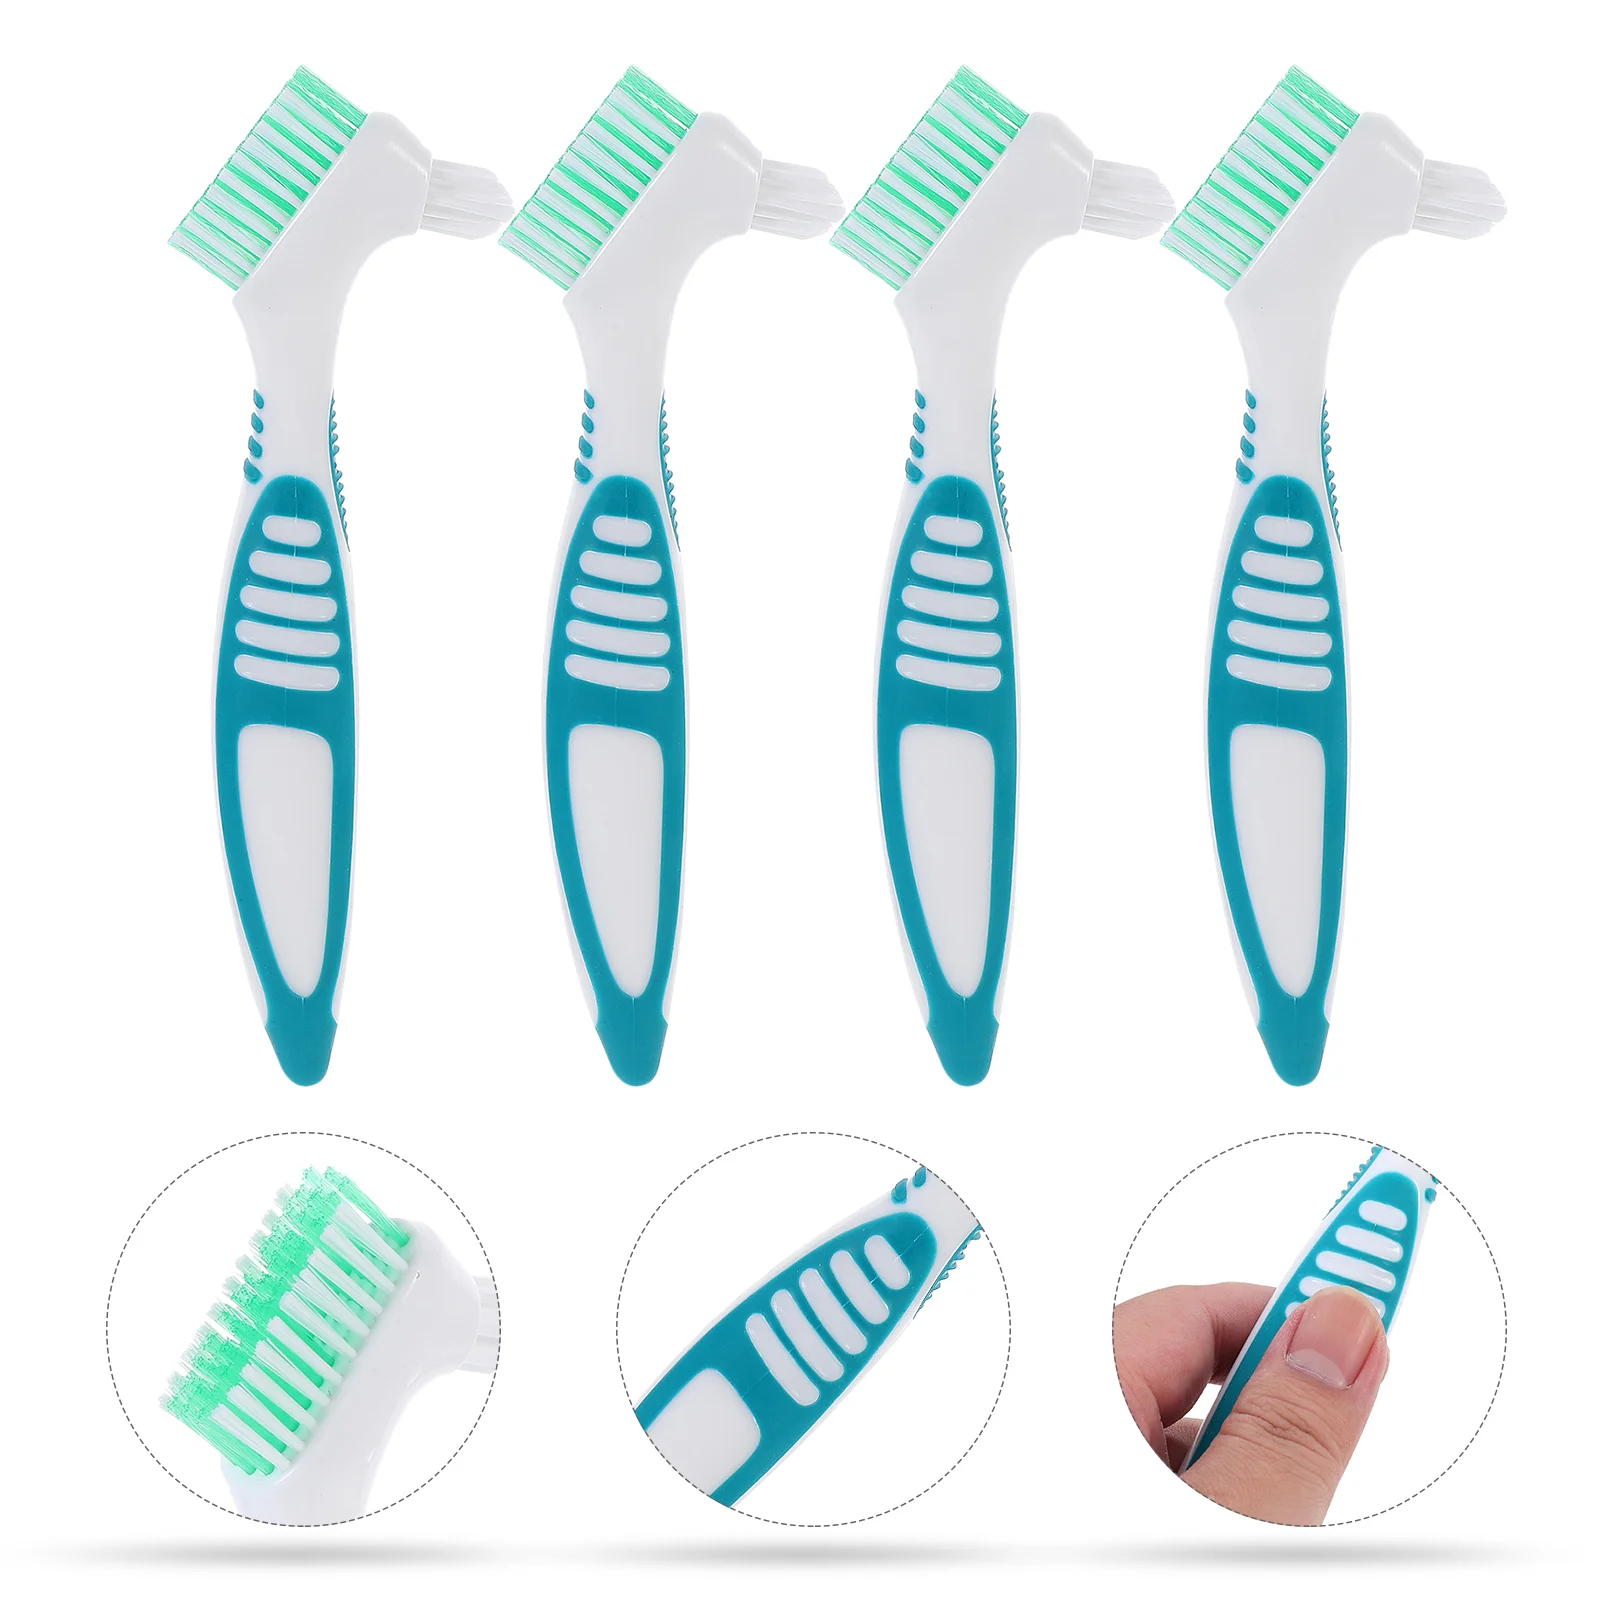 

4 Pcs Denture Useful Cleaning Brushes Products Appliance Plastic Cleaner Care Toothbrushes